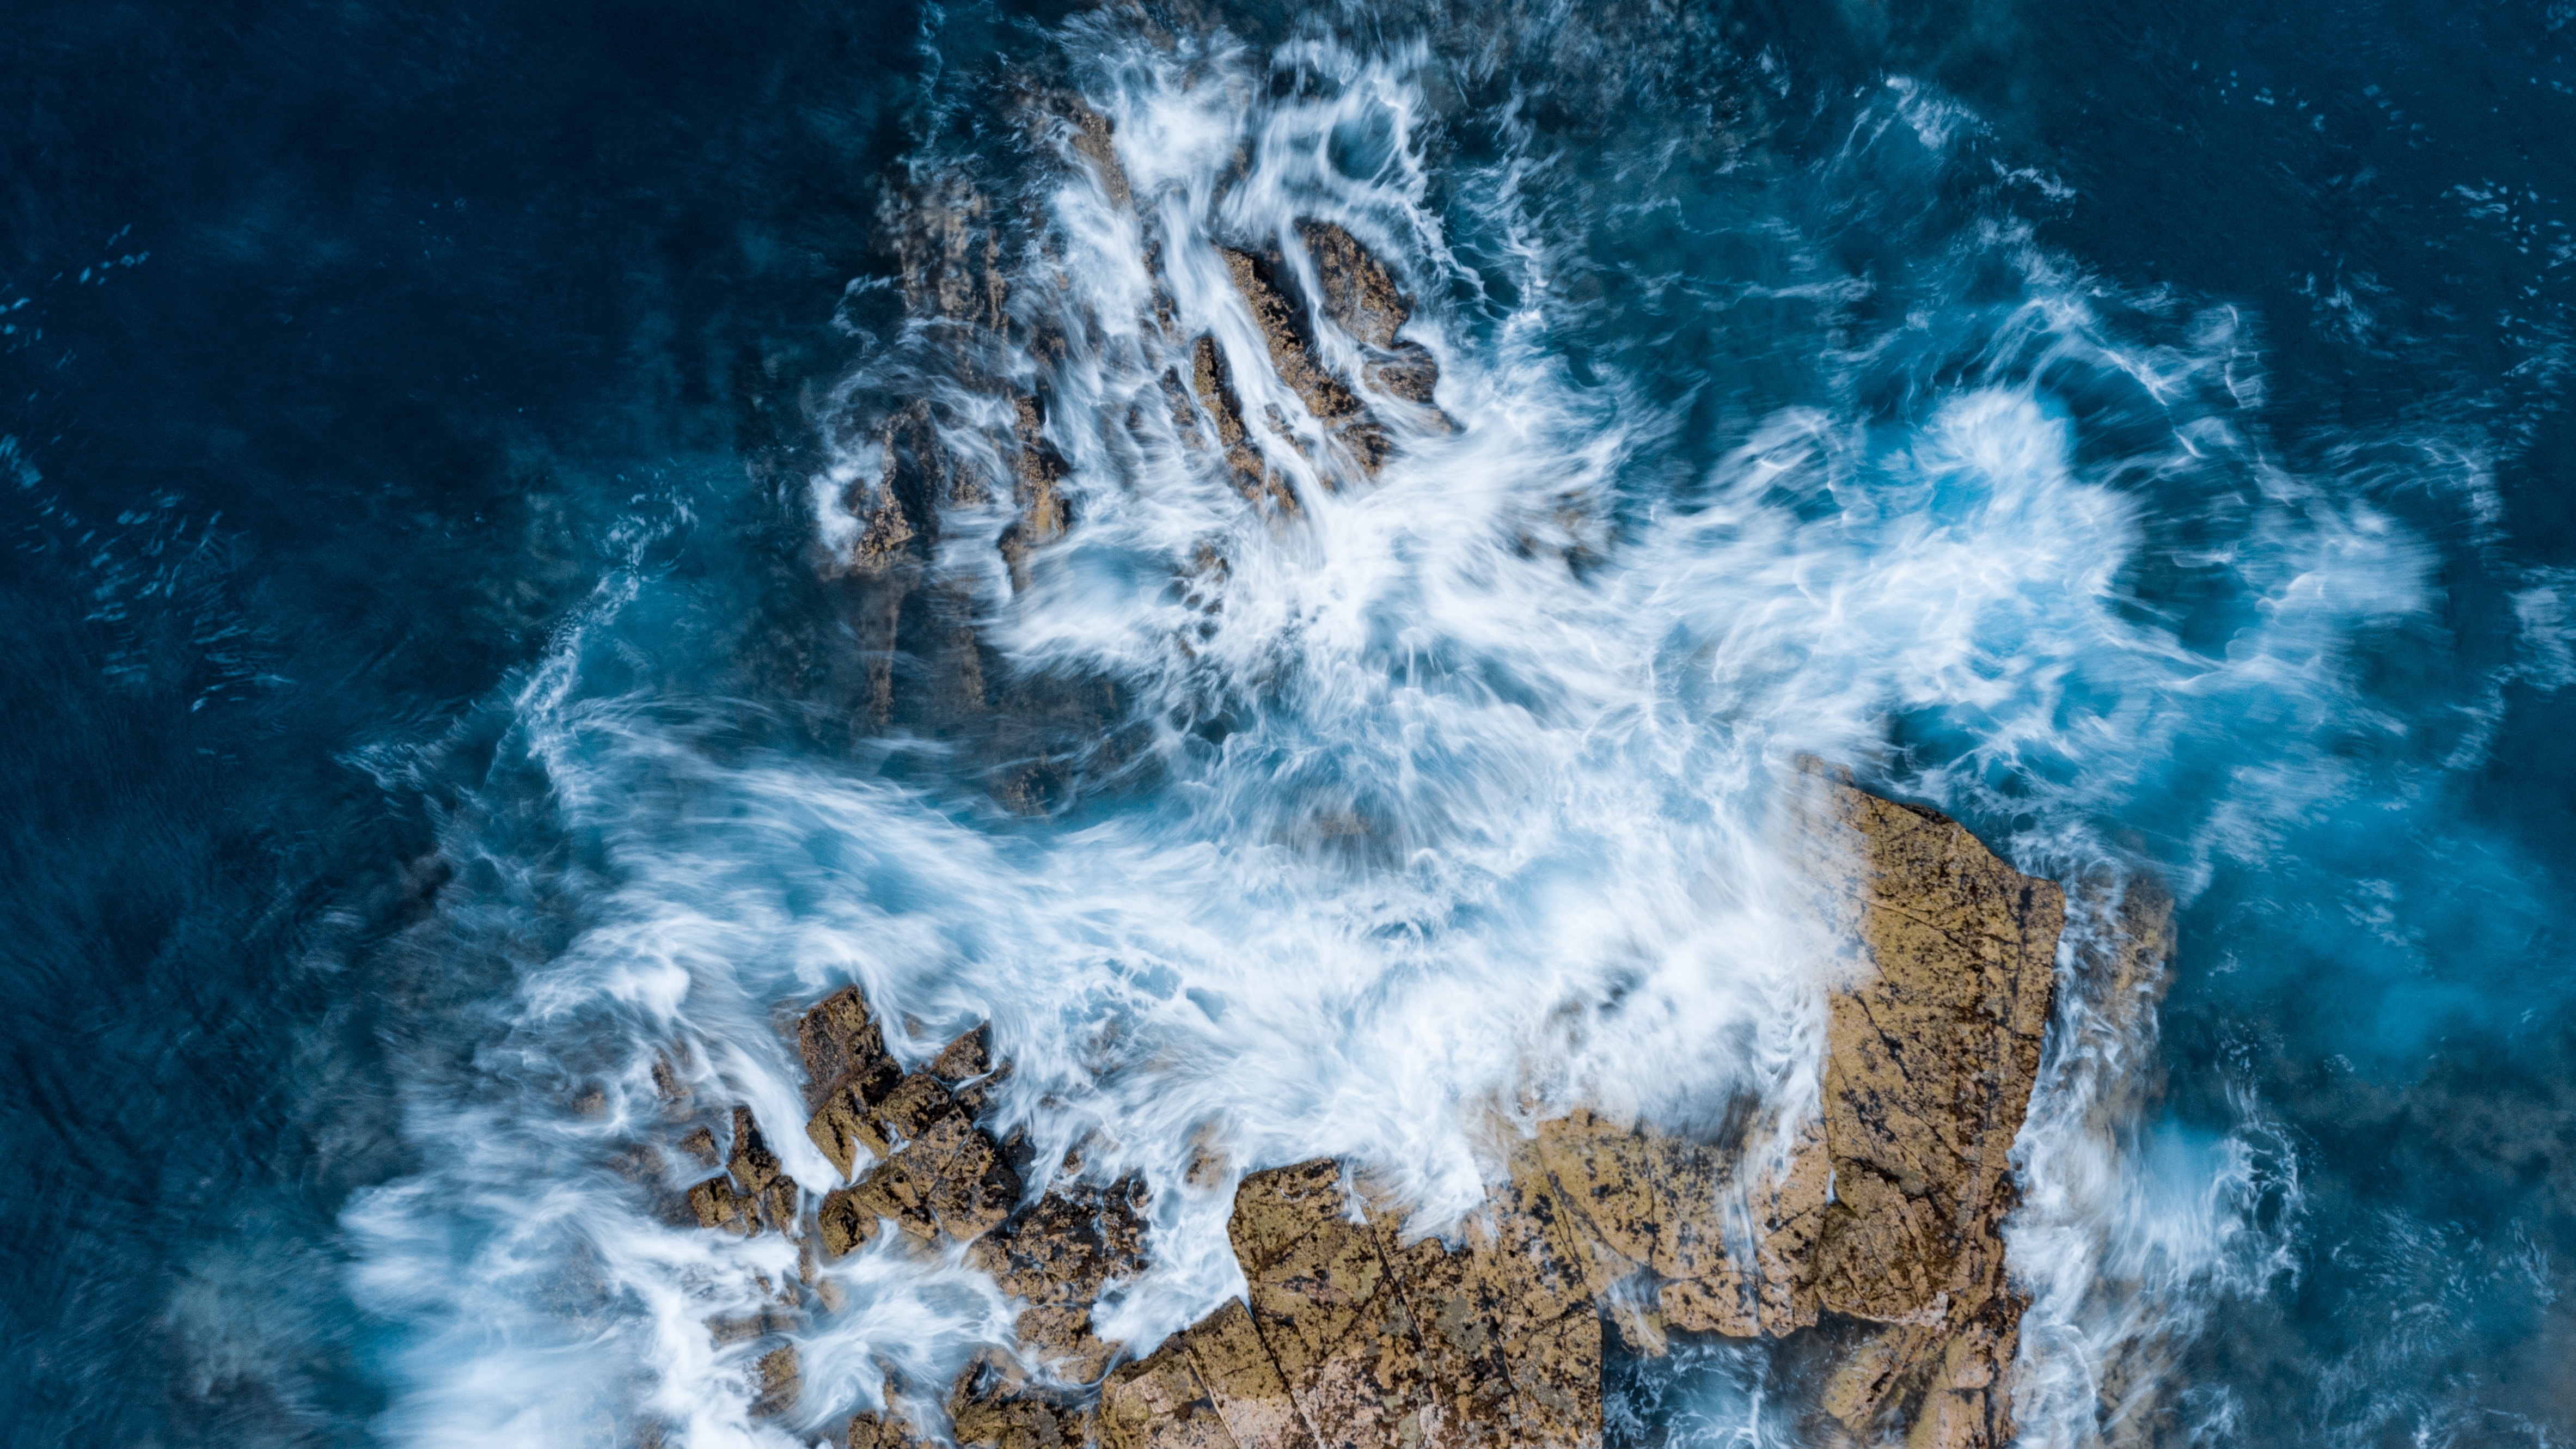 Full HD Wallpaper nature, water, waves, sea, rocks, view from above